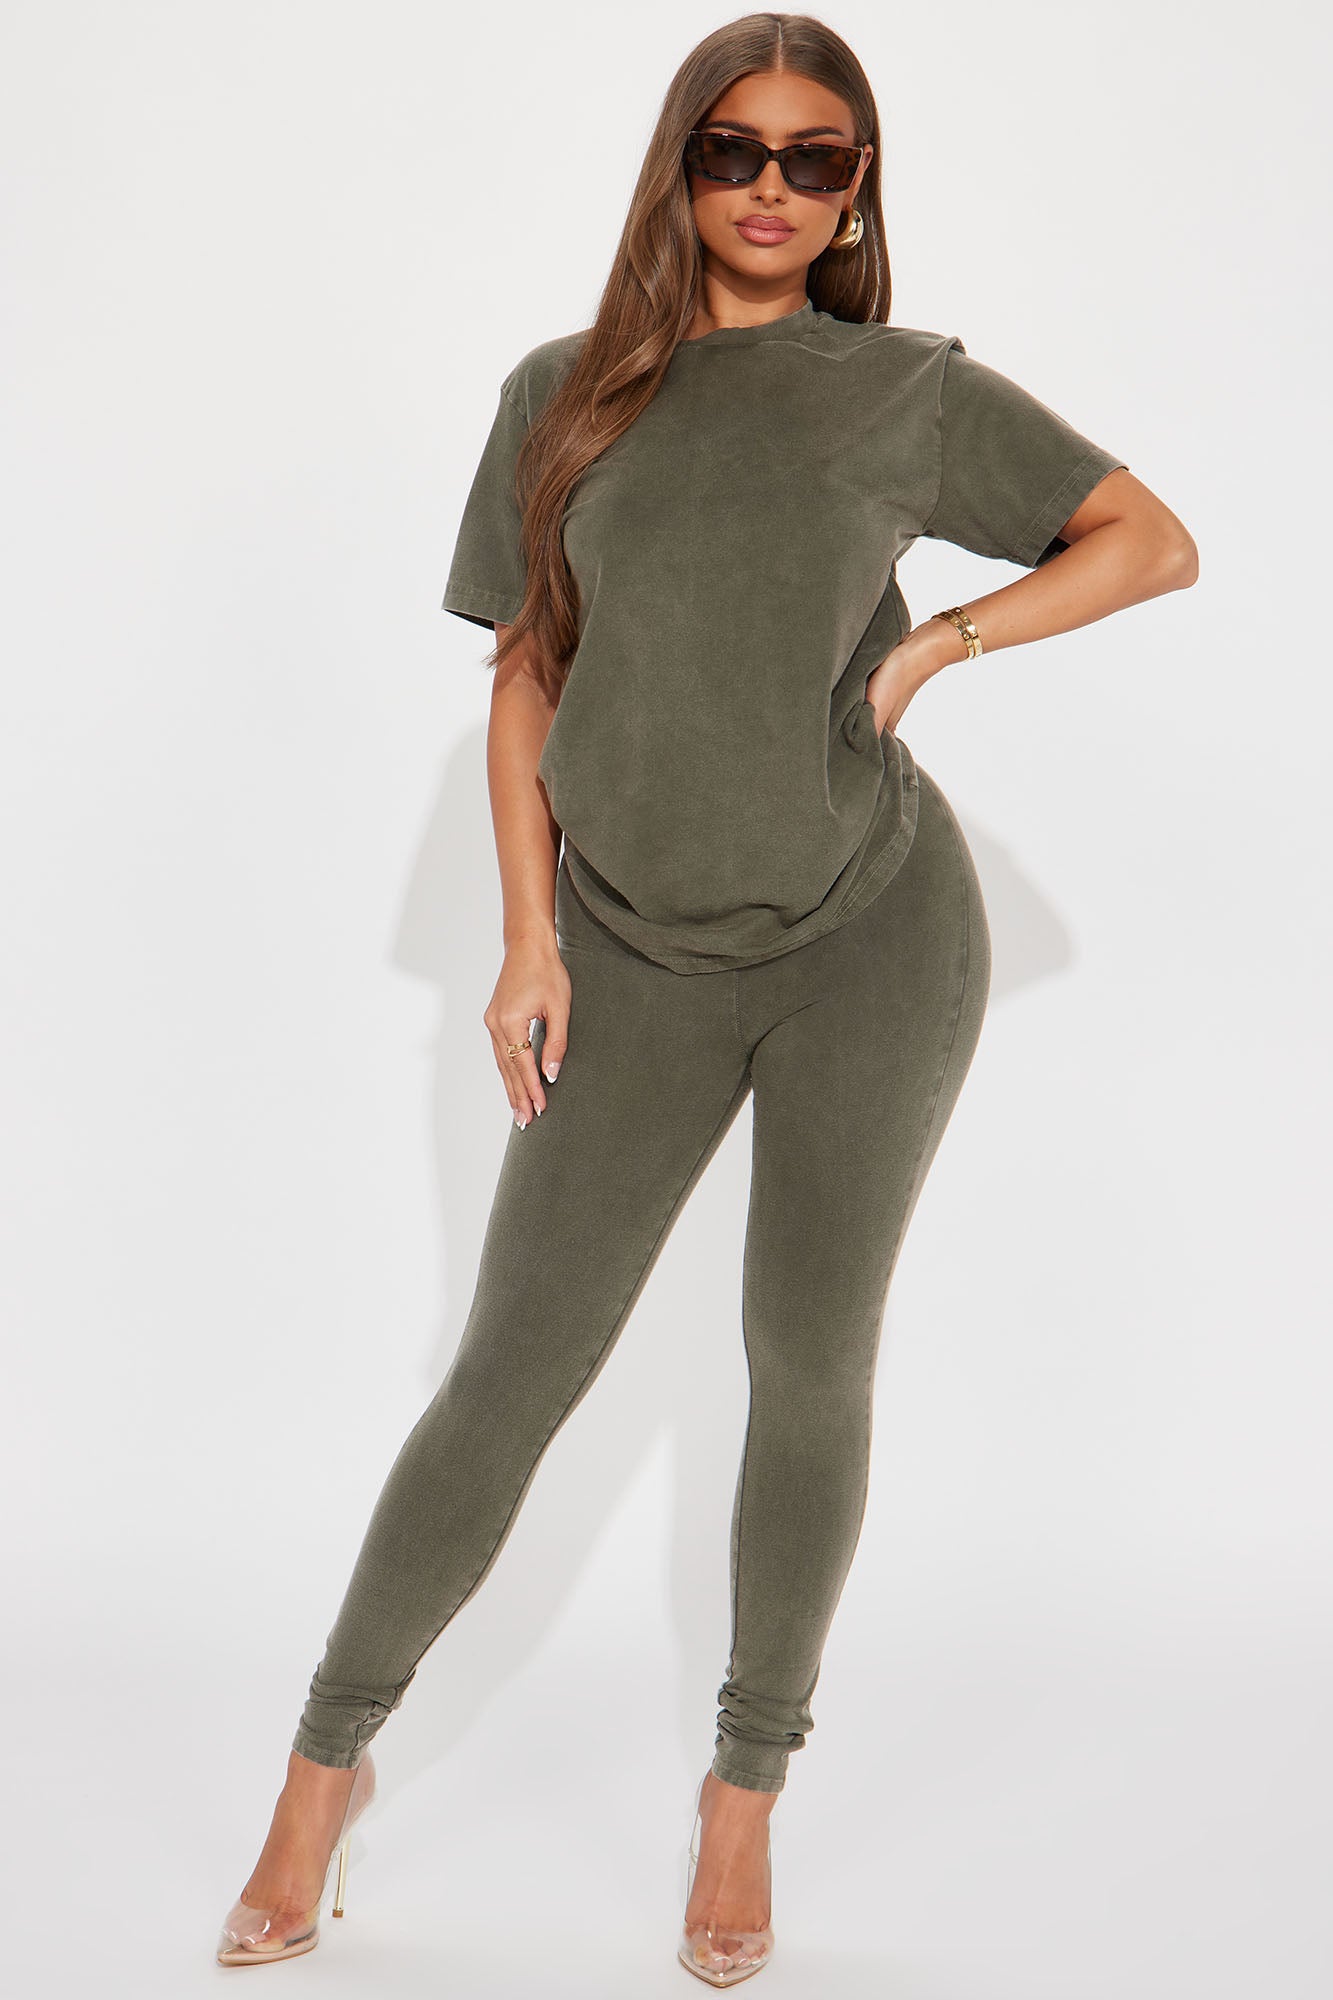 Mineral Wash Moto Leggings in Olive – Max & Addy